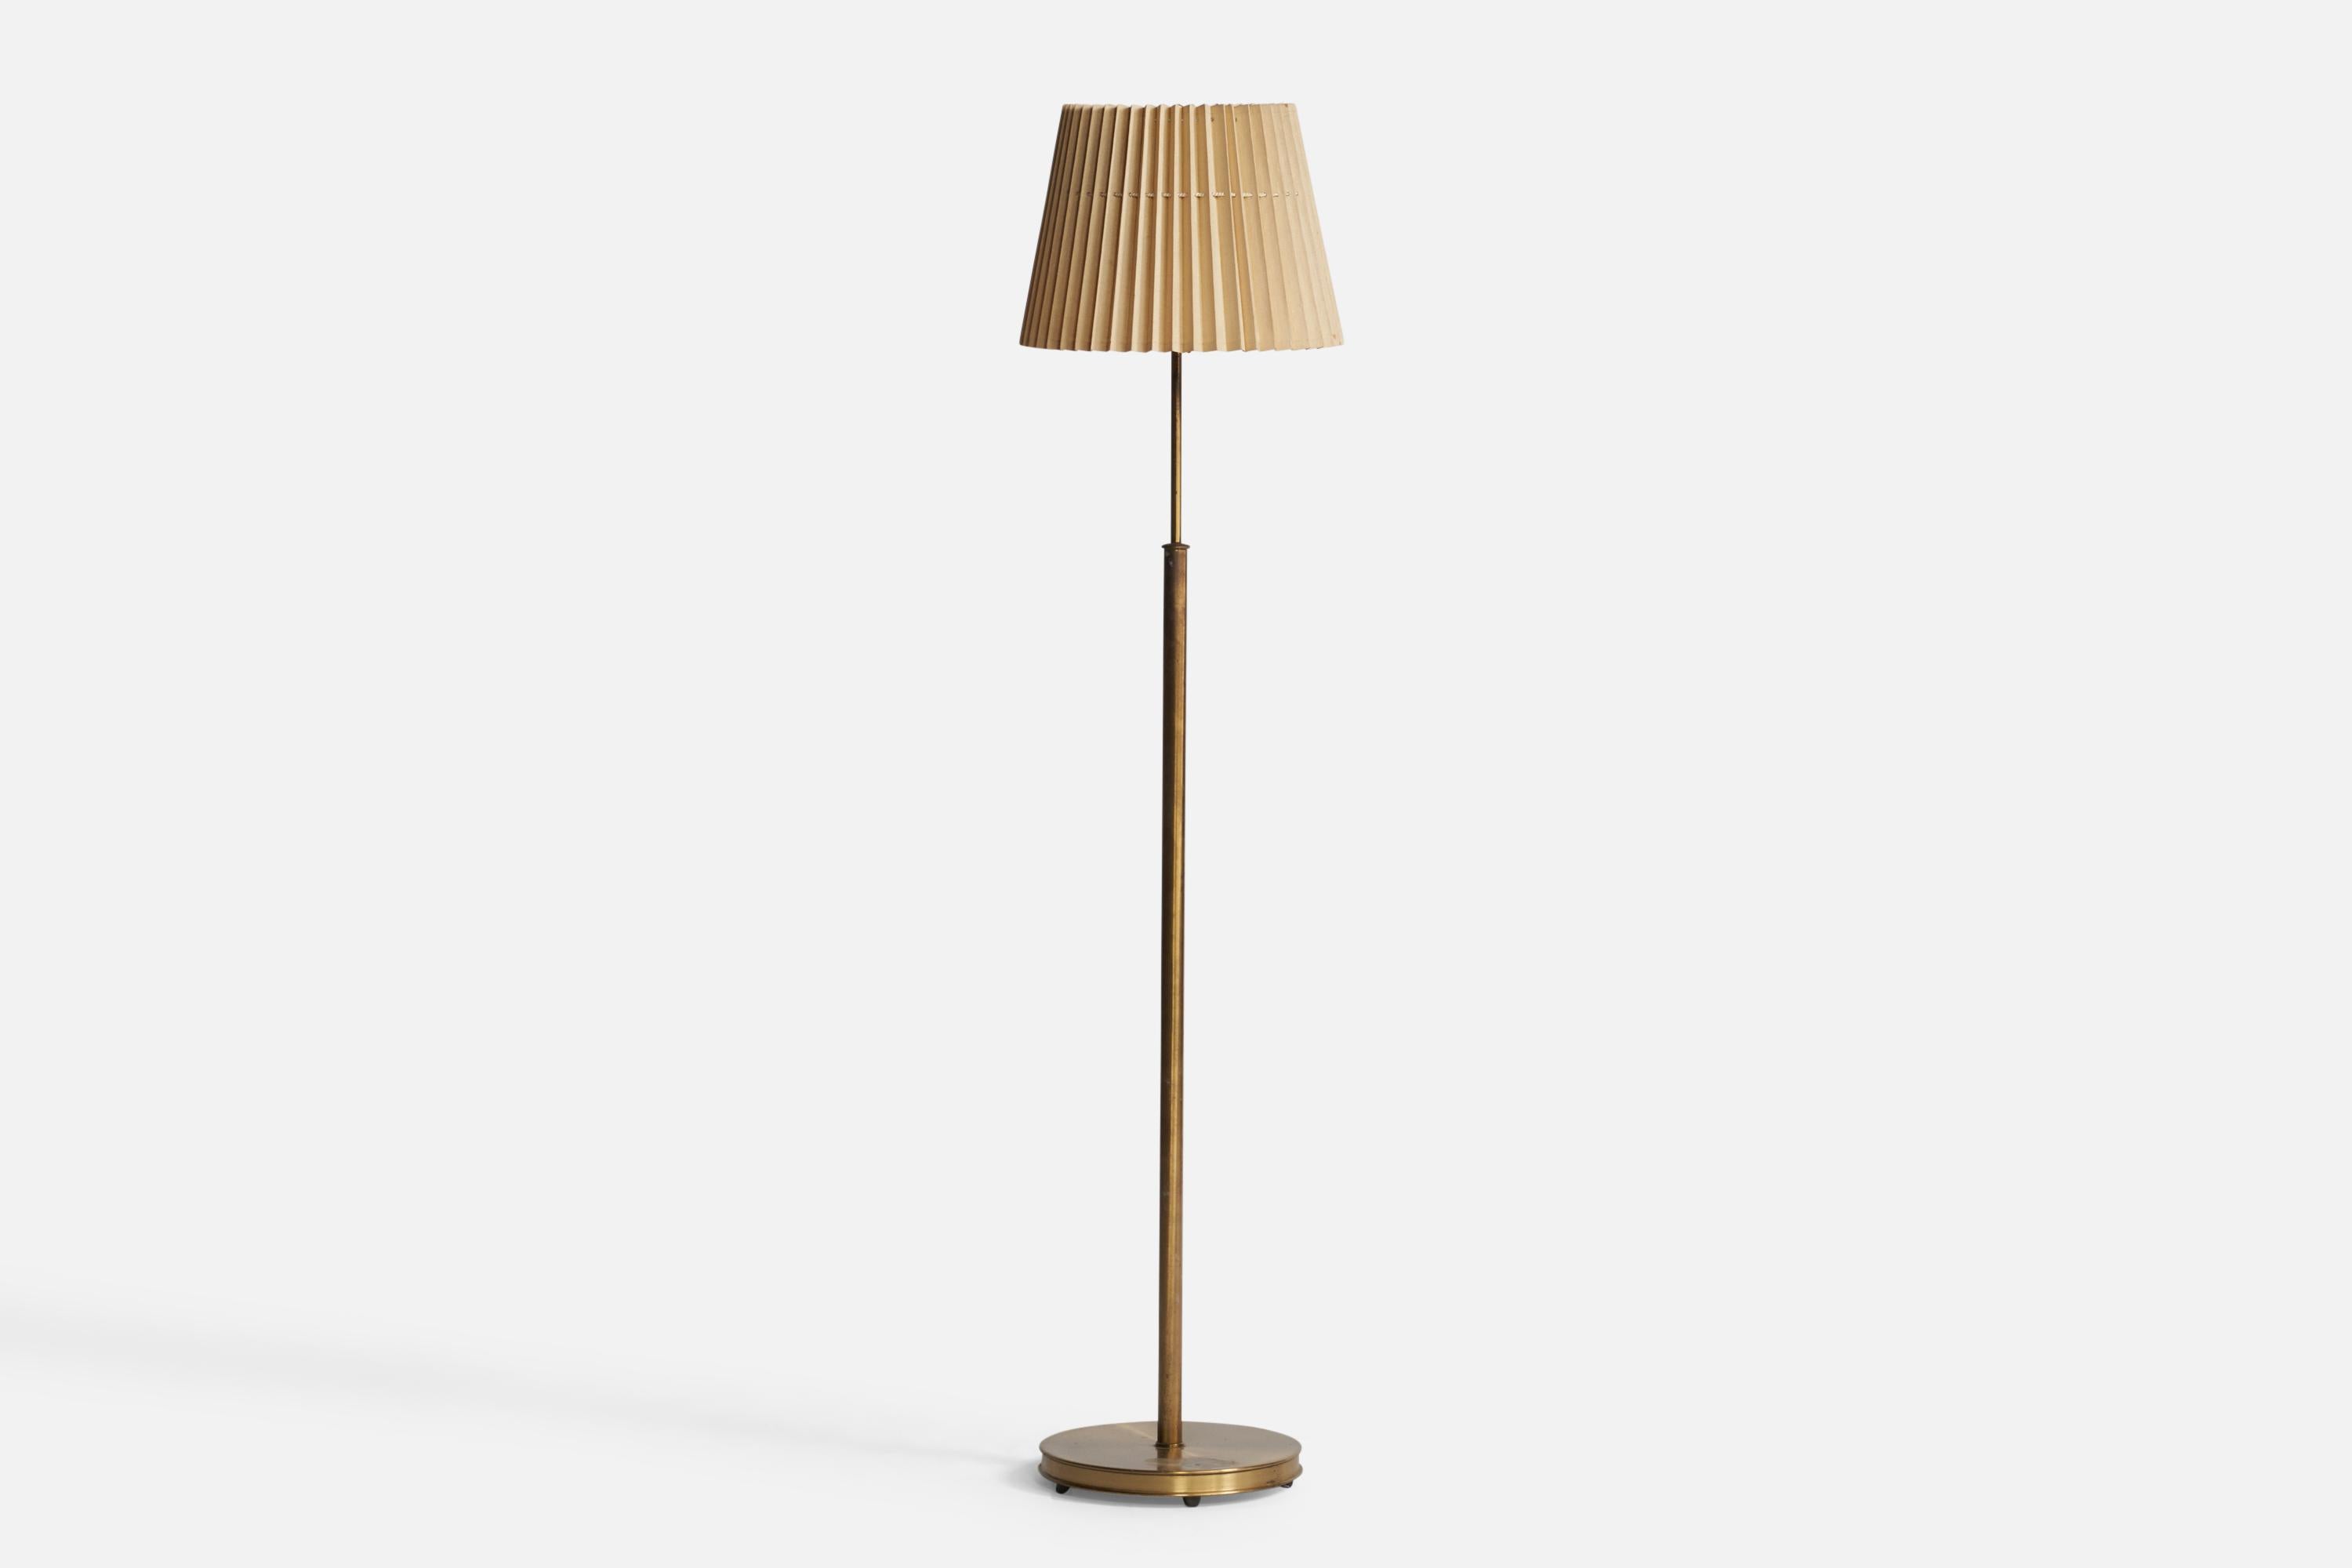 A brass and beige paper floor lamp designed and produced in Sweden, c. 1940s.

Overall Dimensions (inches): 60.5” H x 14” W x 14” D. Diameter of base is 11.75”, diameter of shade is 14”. Stated dimensions include lampshade.
Bulb Specifications: E-26